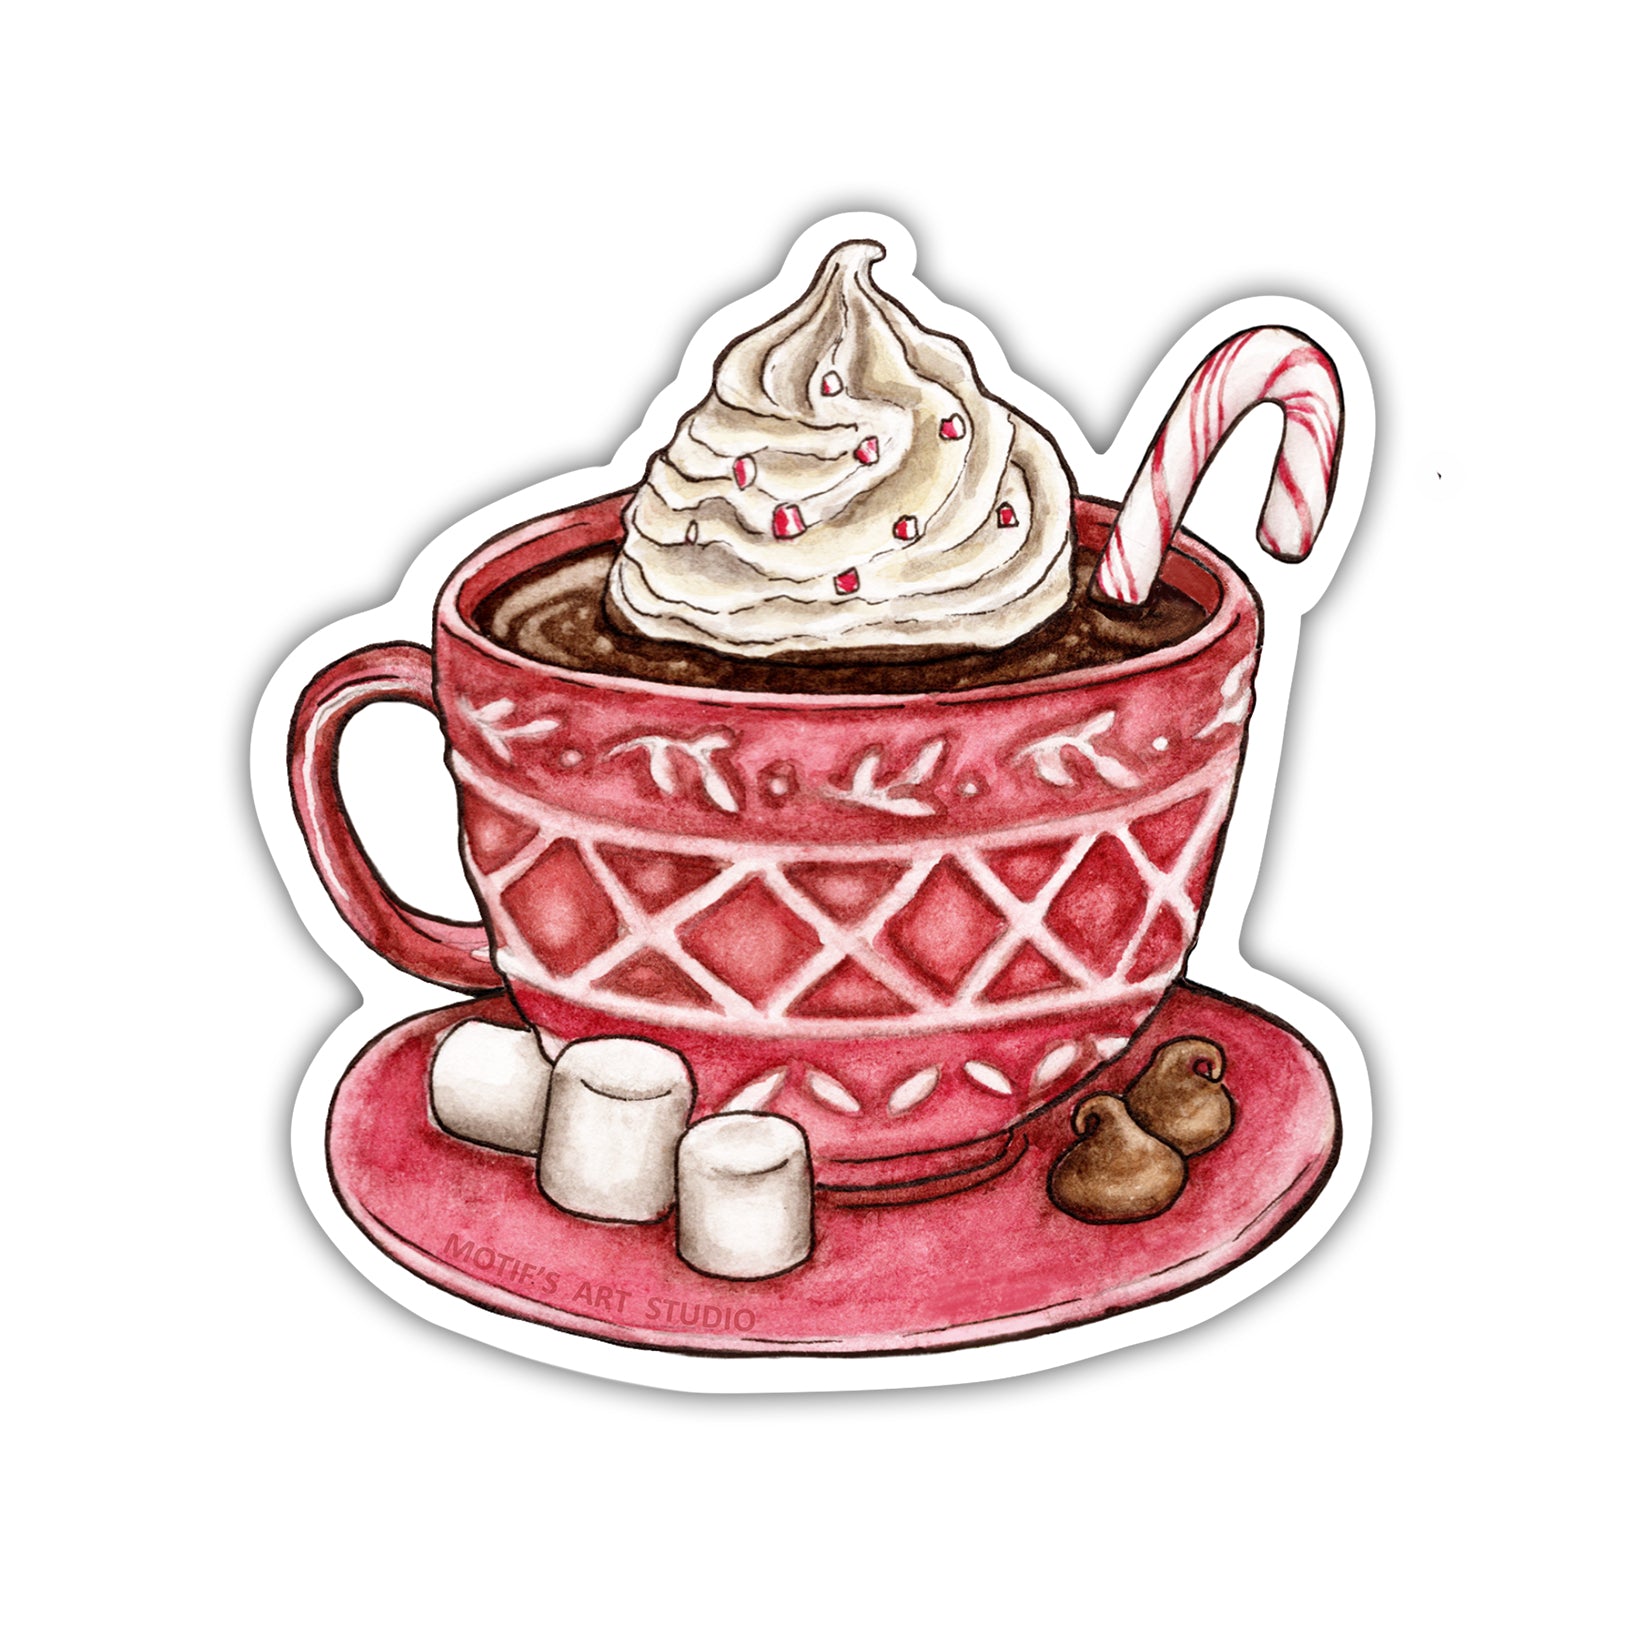 Sticker of a red mug with a sweater pattern on it filled with got chocolate, whipped cream, and a candy cane with marshmellows.